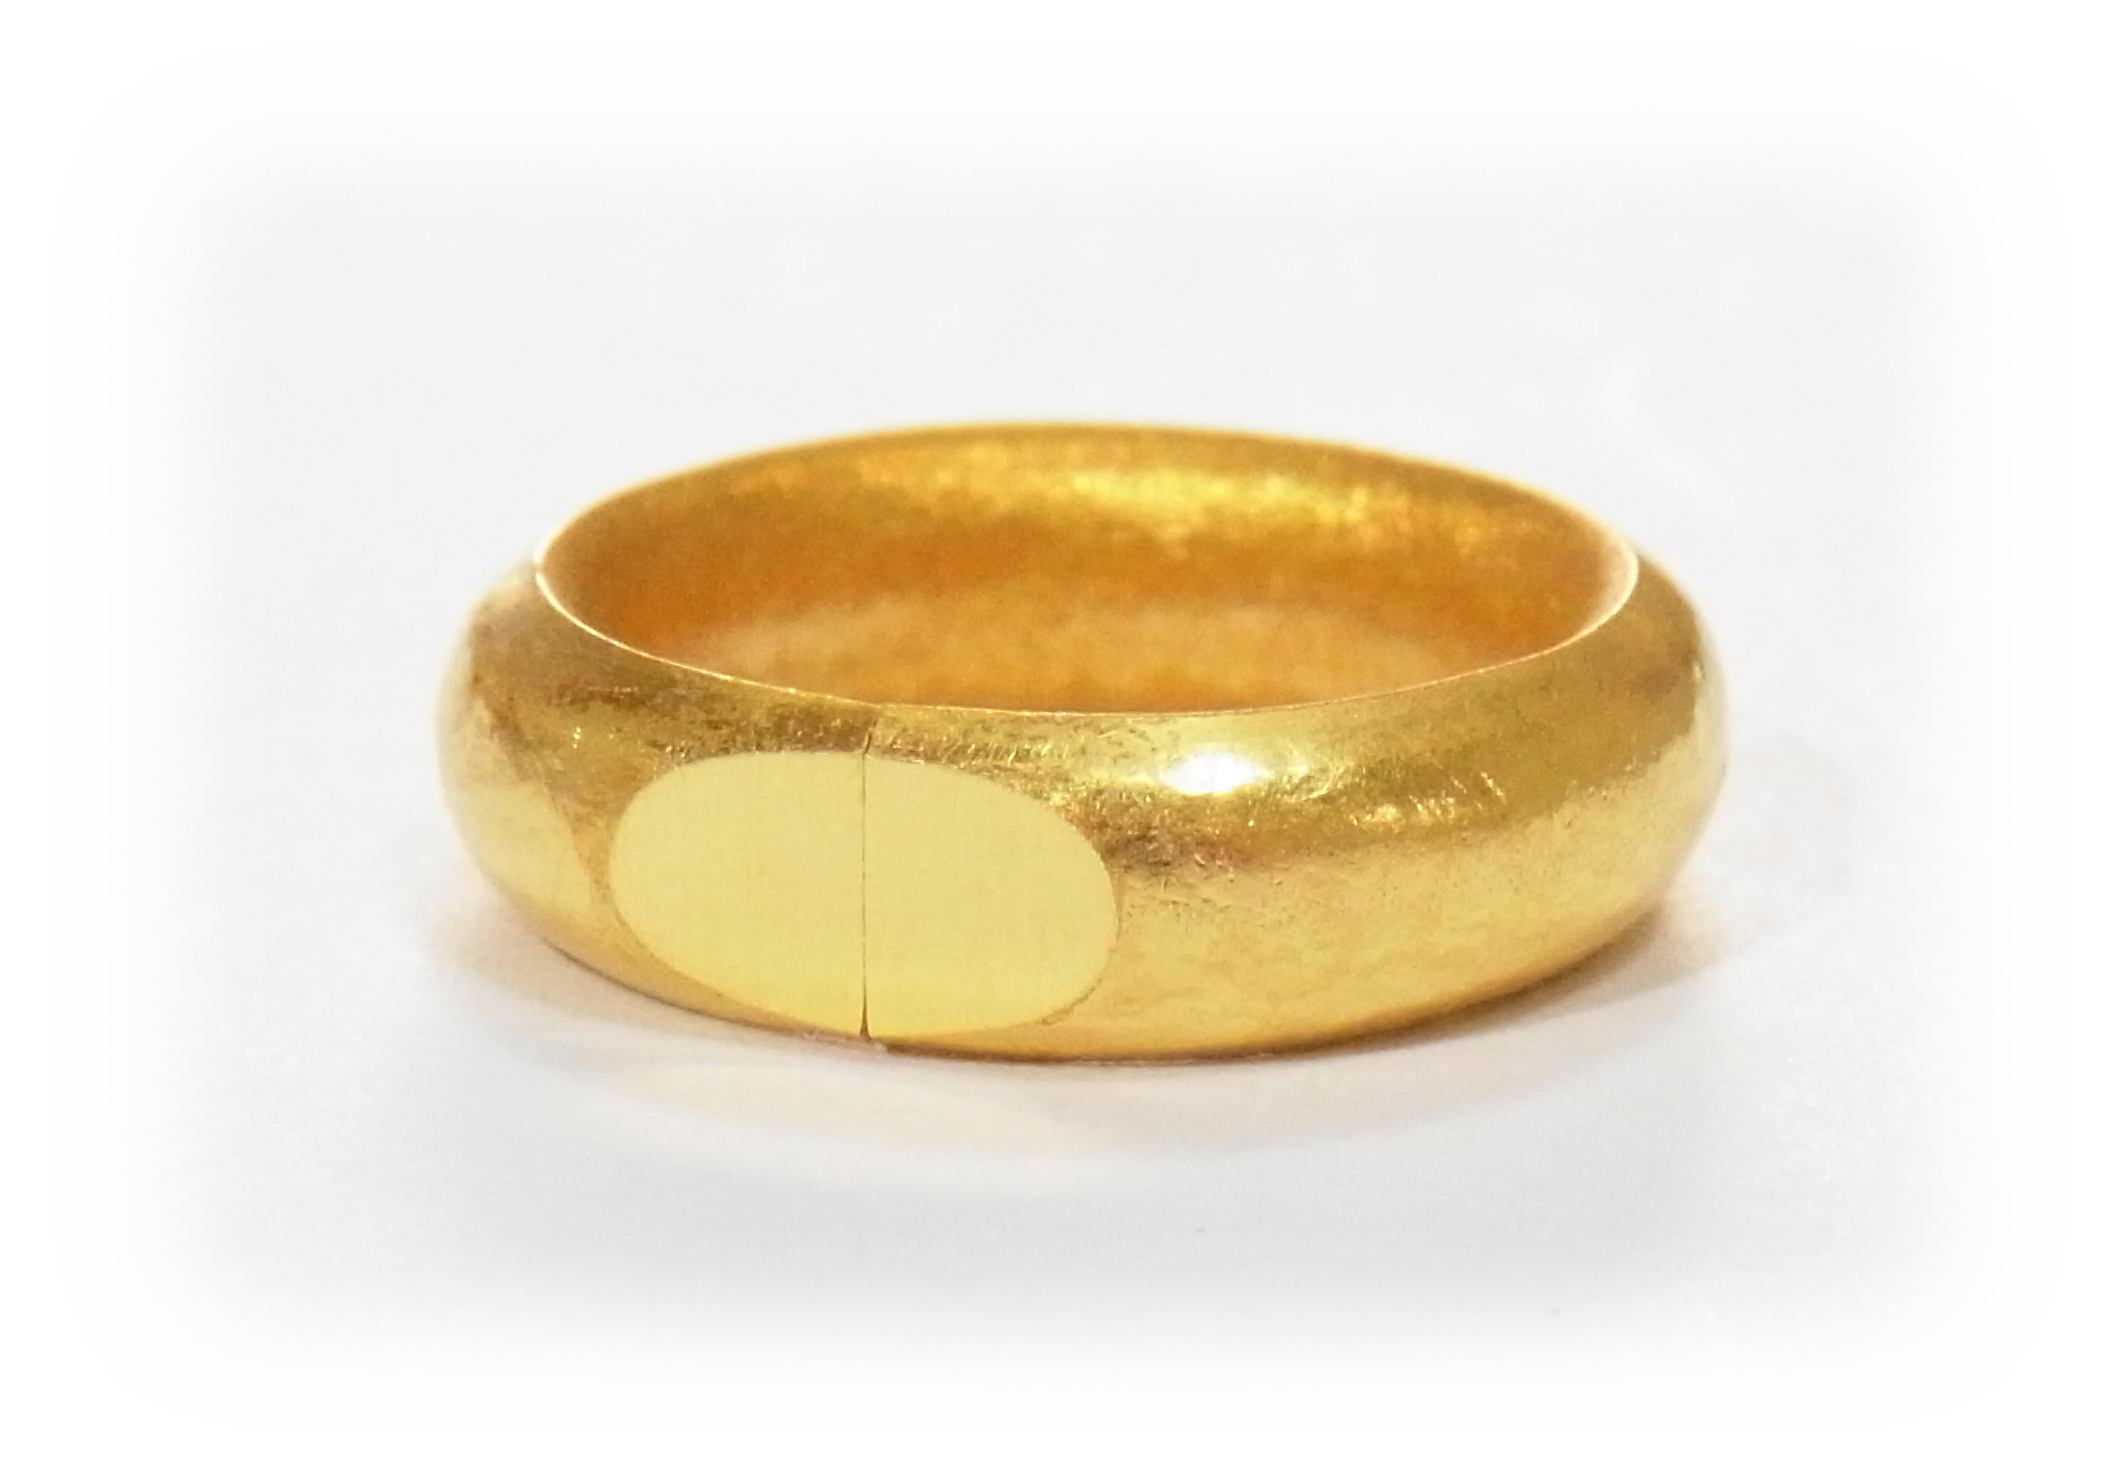 Step7:Bend the gold bar and shape it into a ring.